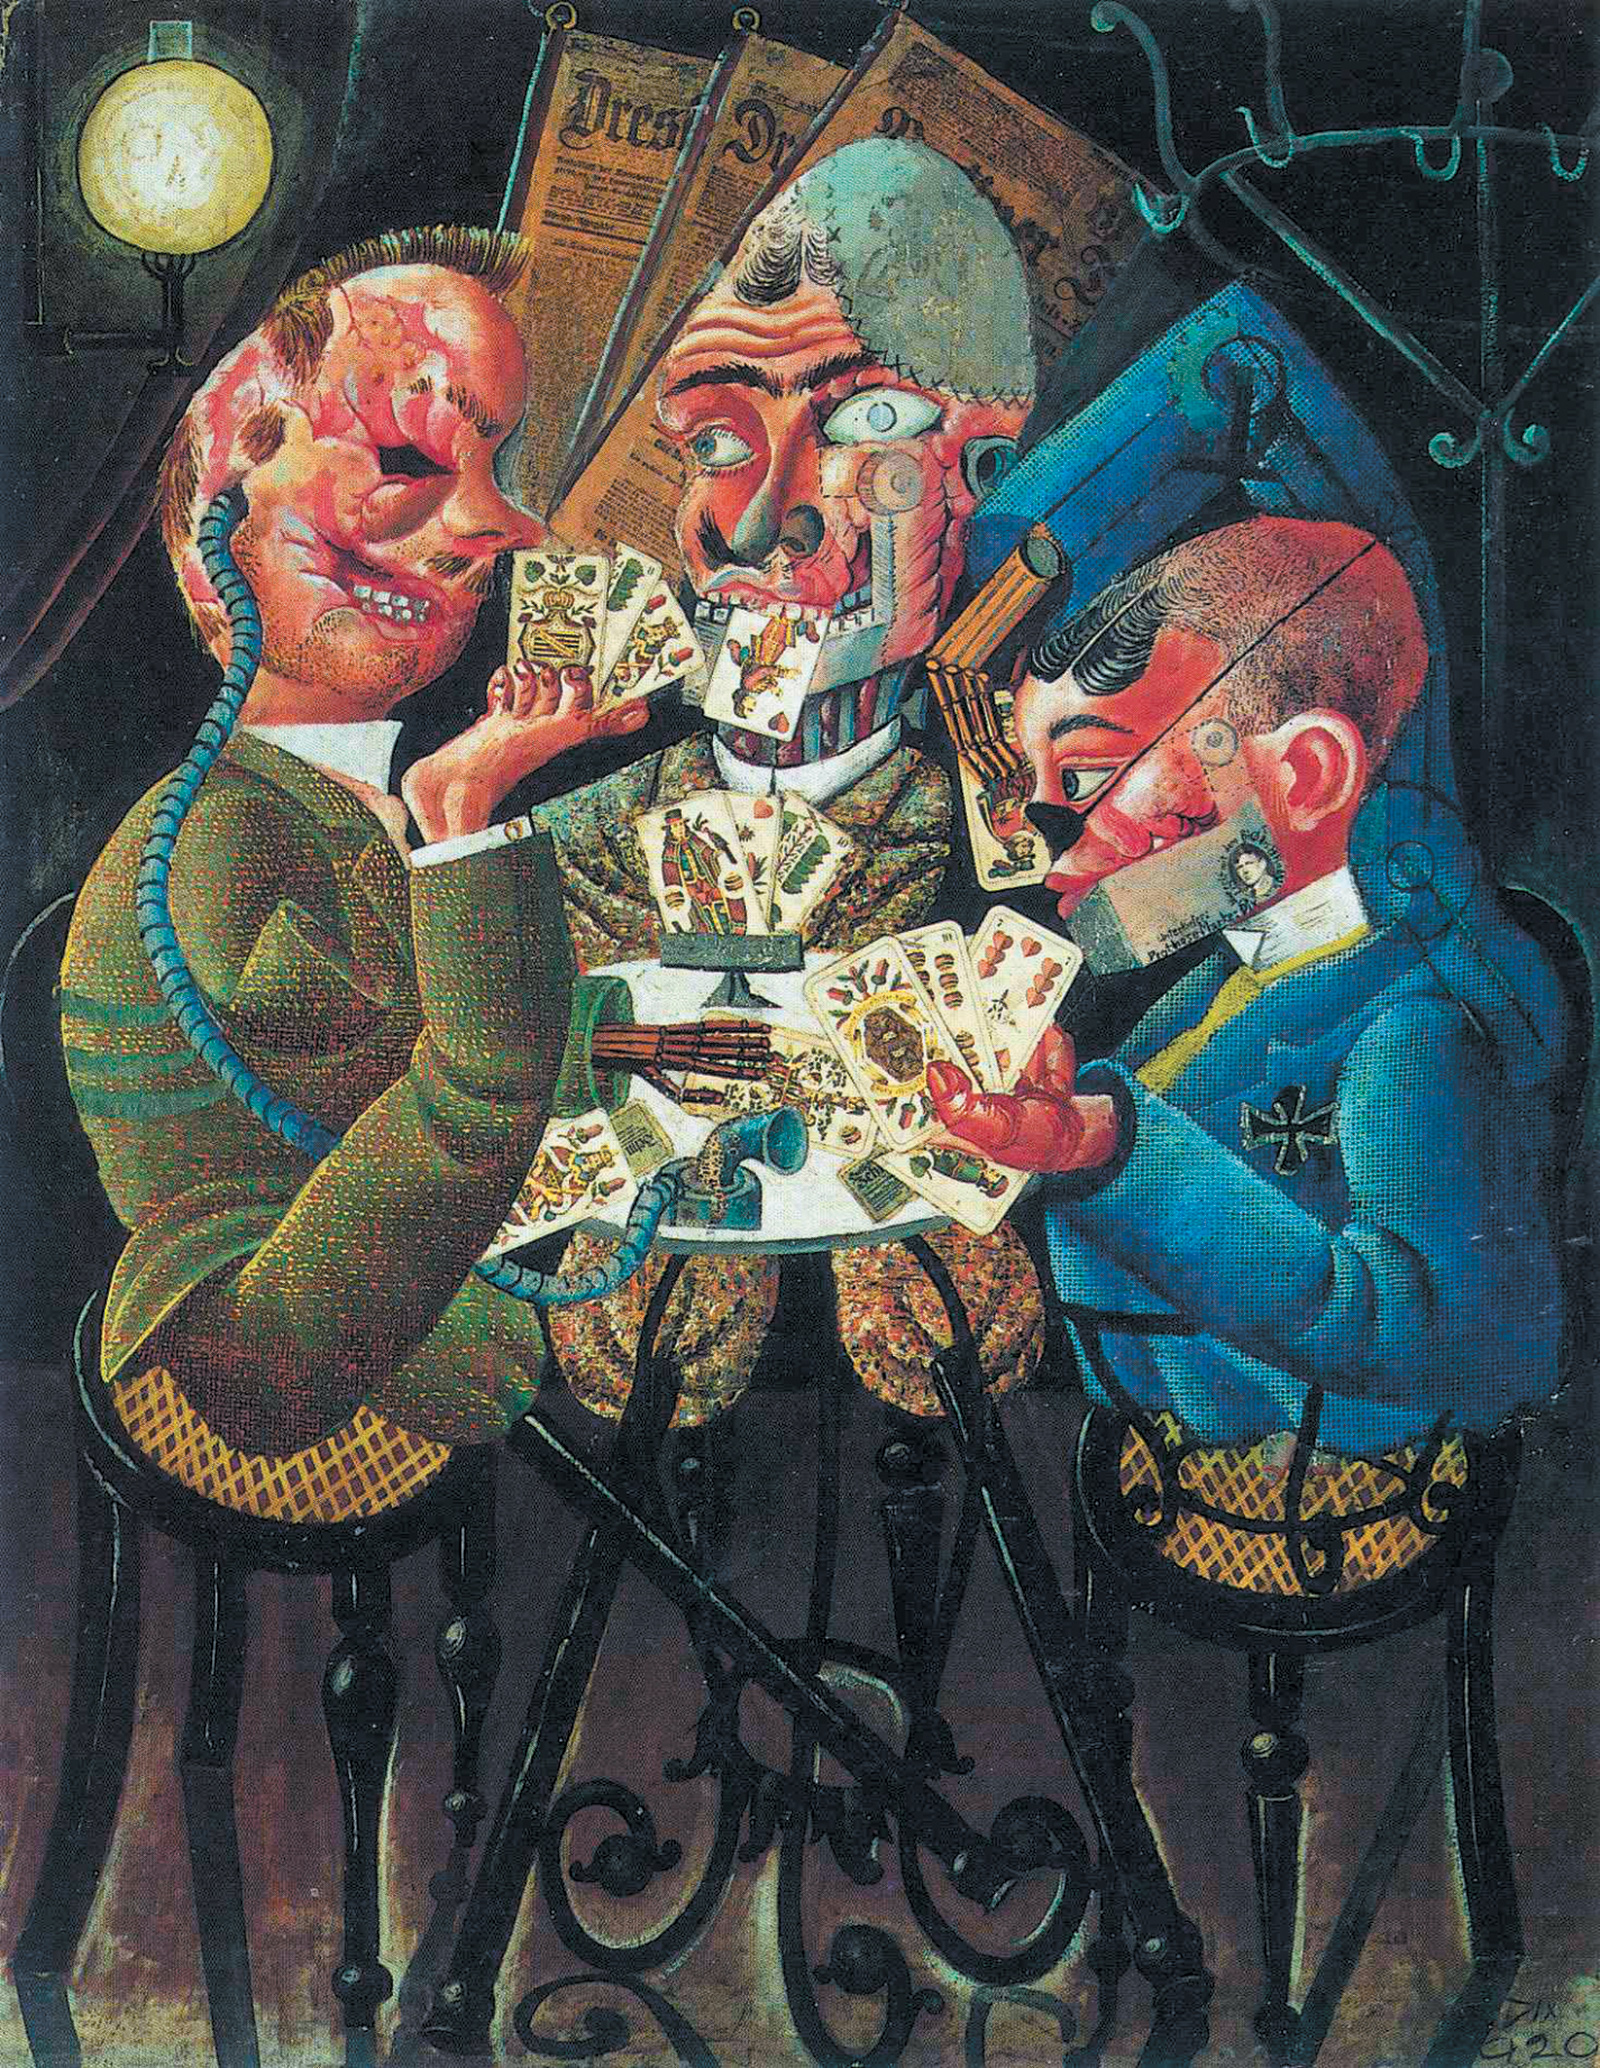 Otto Dix: The Skat Players, 1920